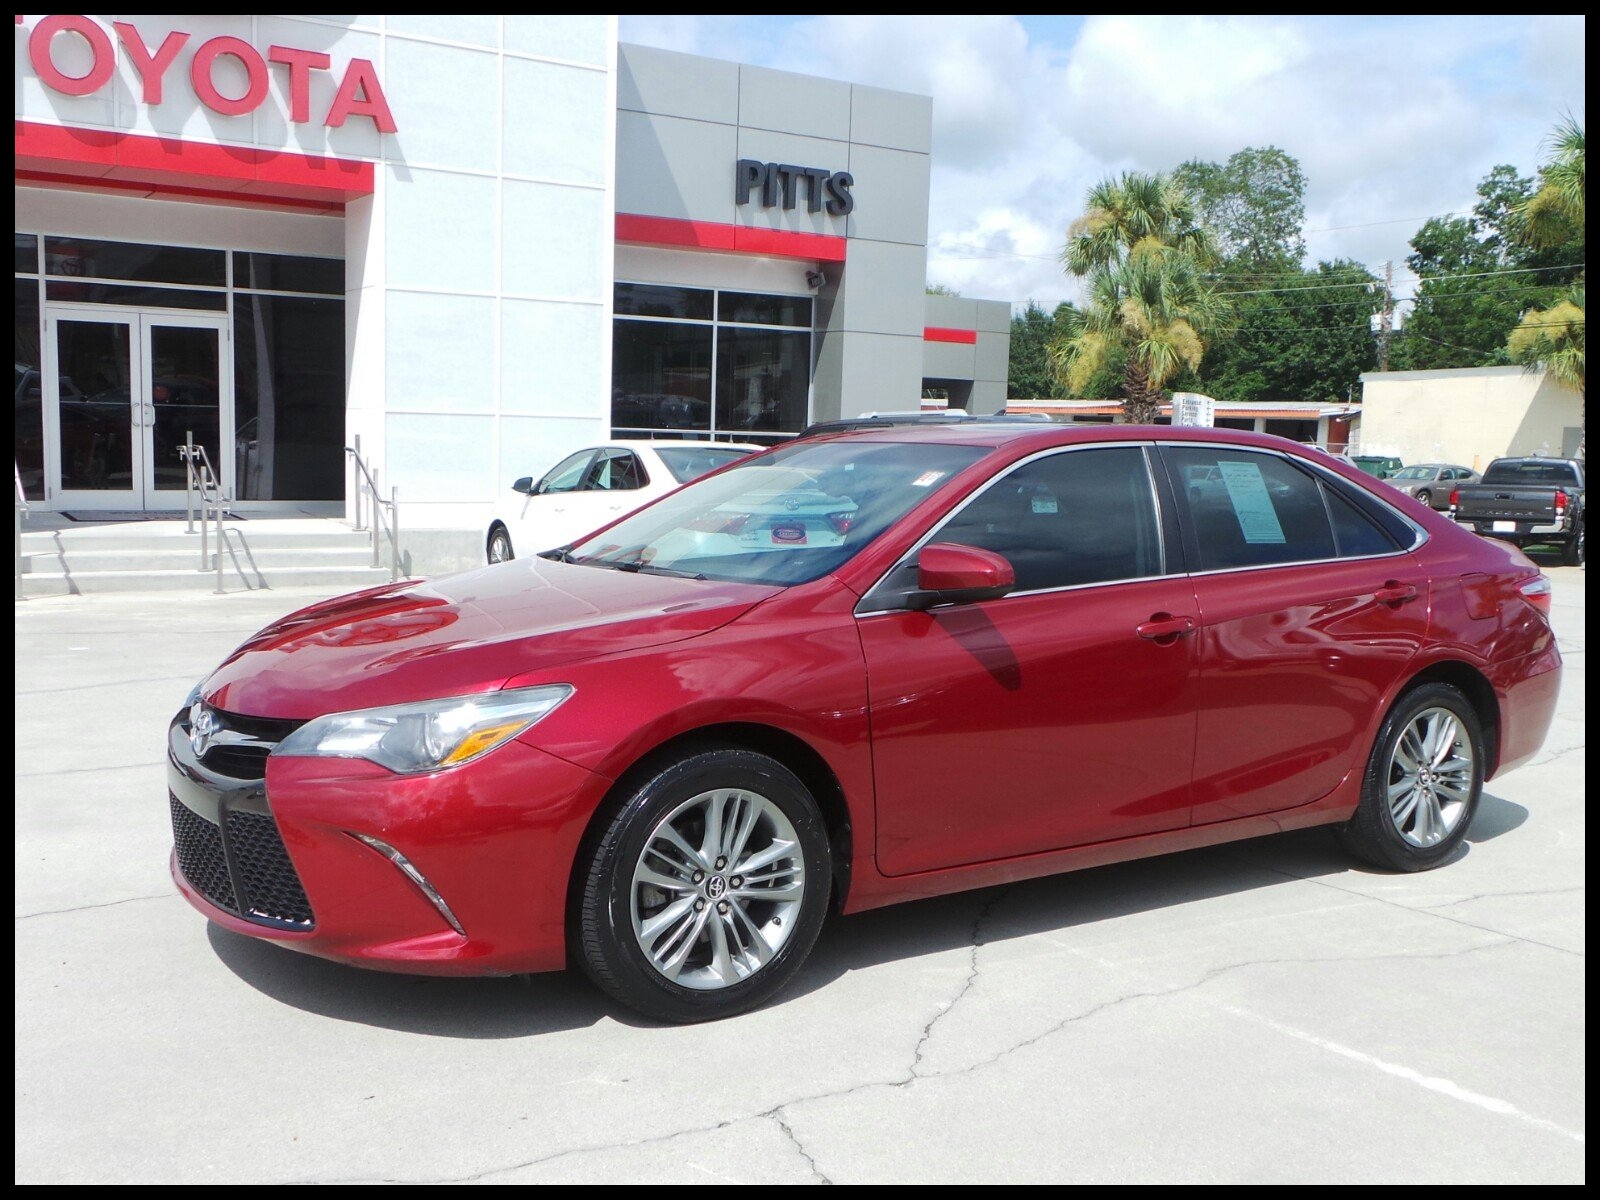 Pre Owned 2015 Toyota Camry SE